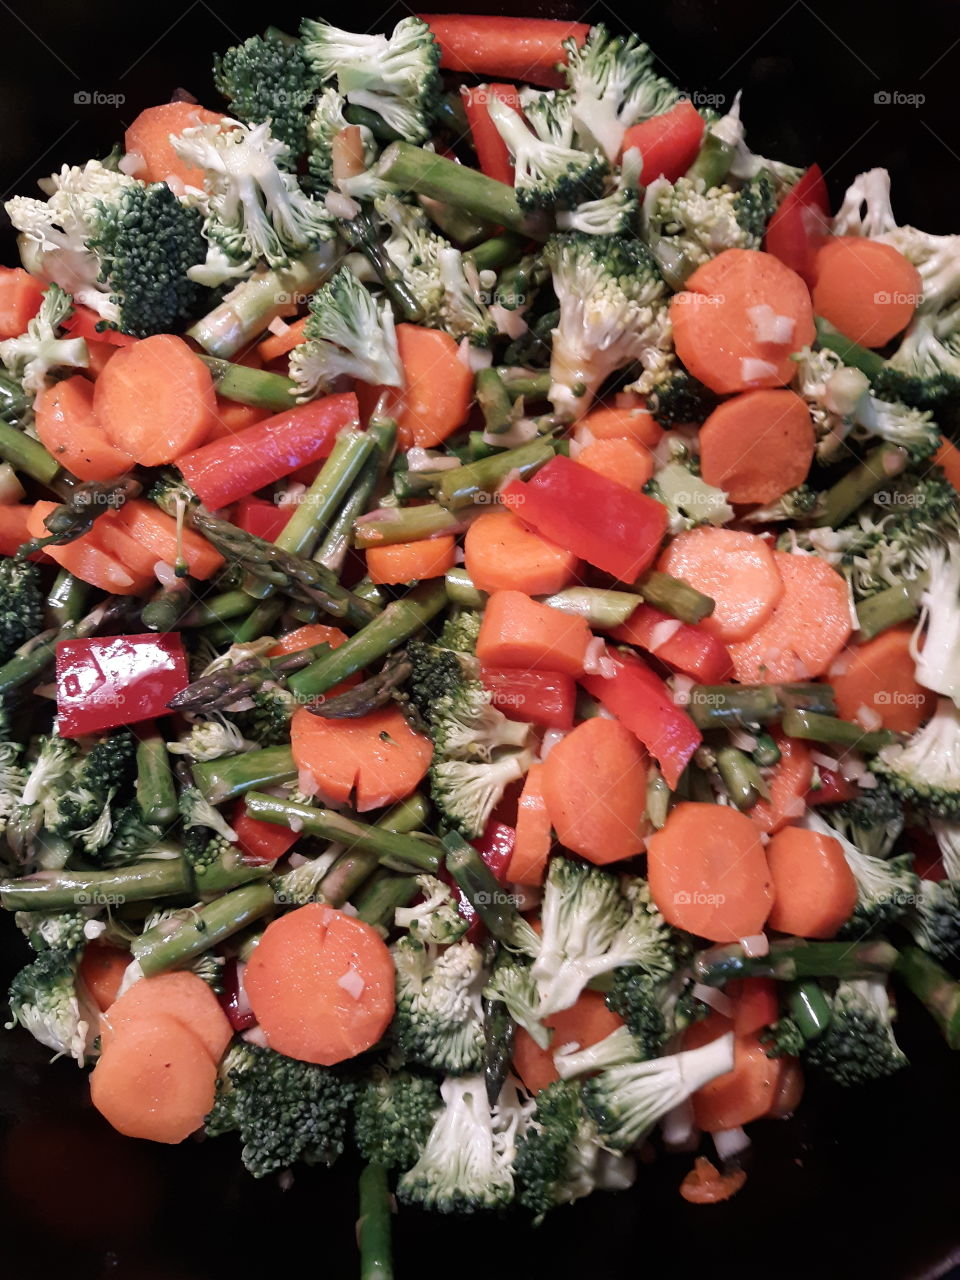 Cooking Stir Fry Tonight -With Lots of Veggies